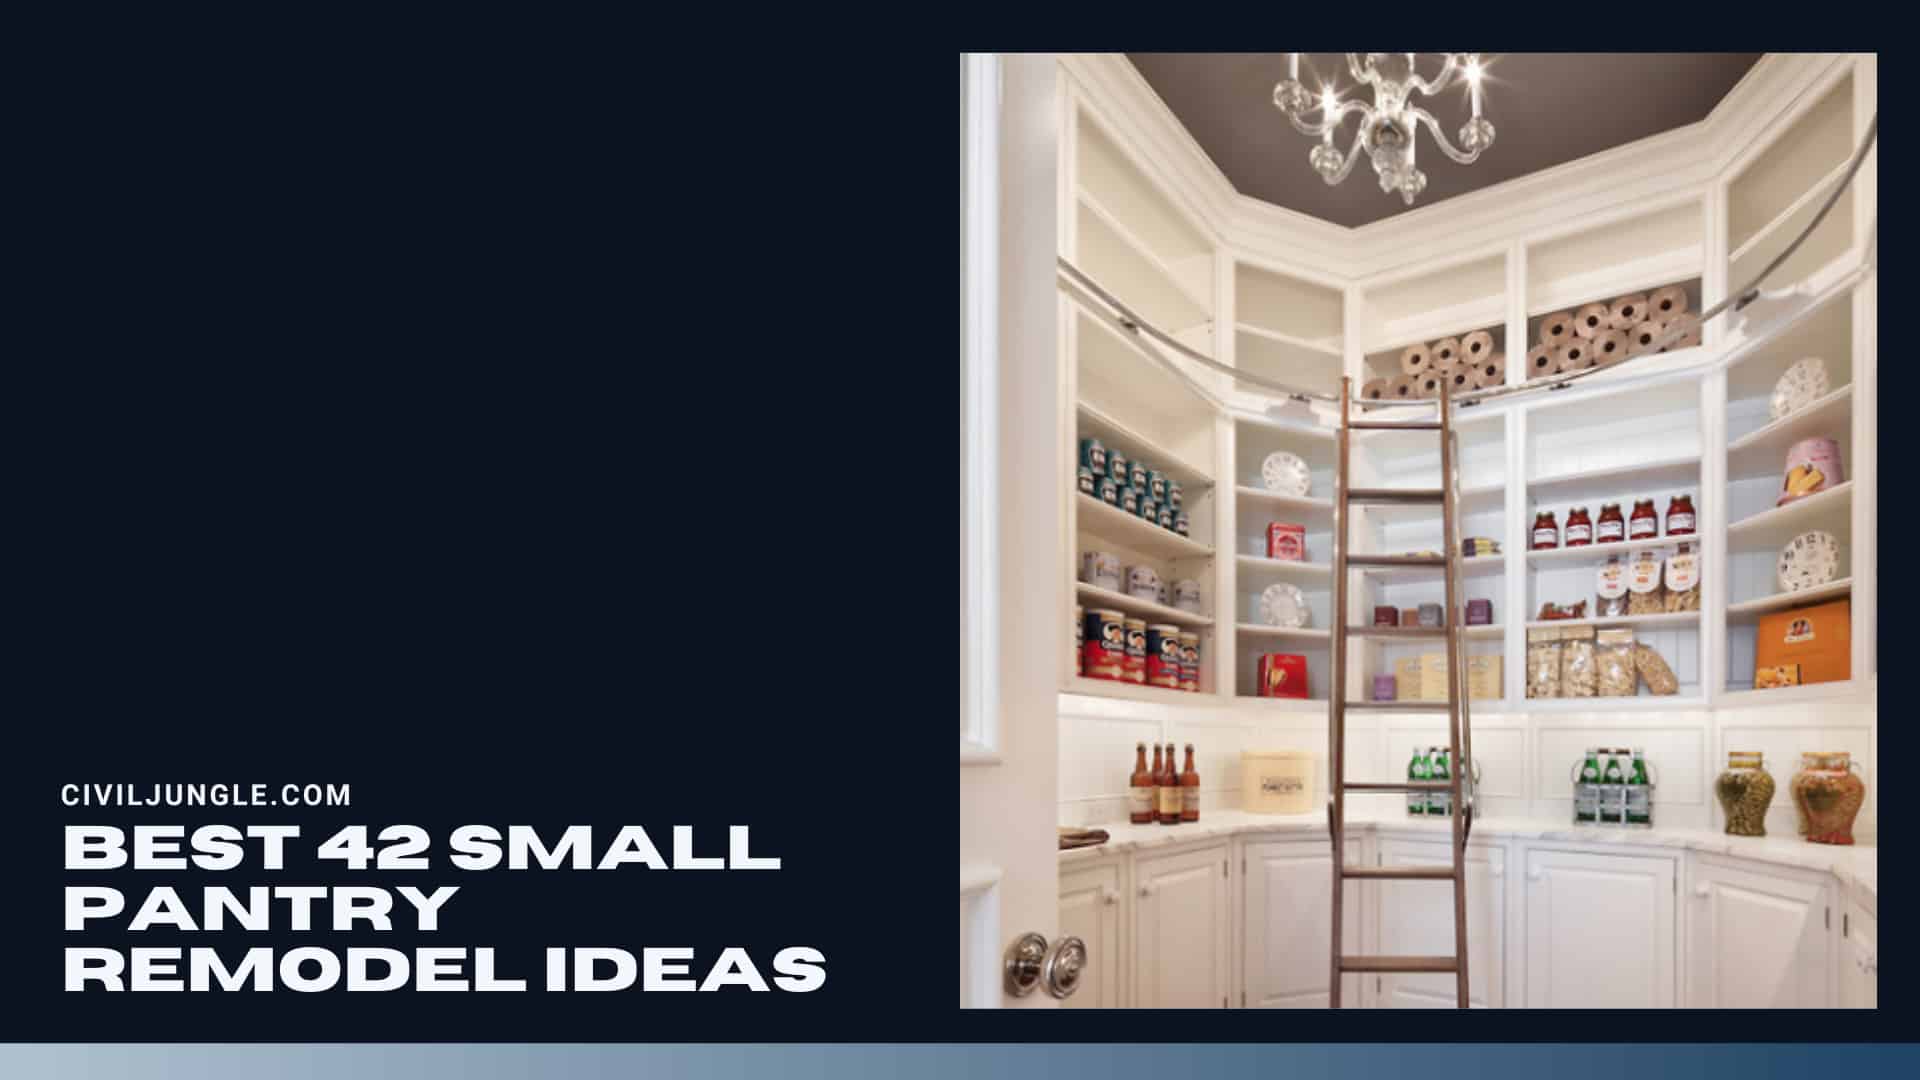 Best 42 Small Pantry Remodel Ideas